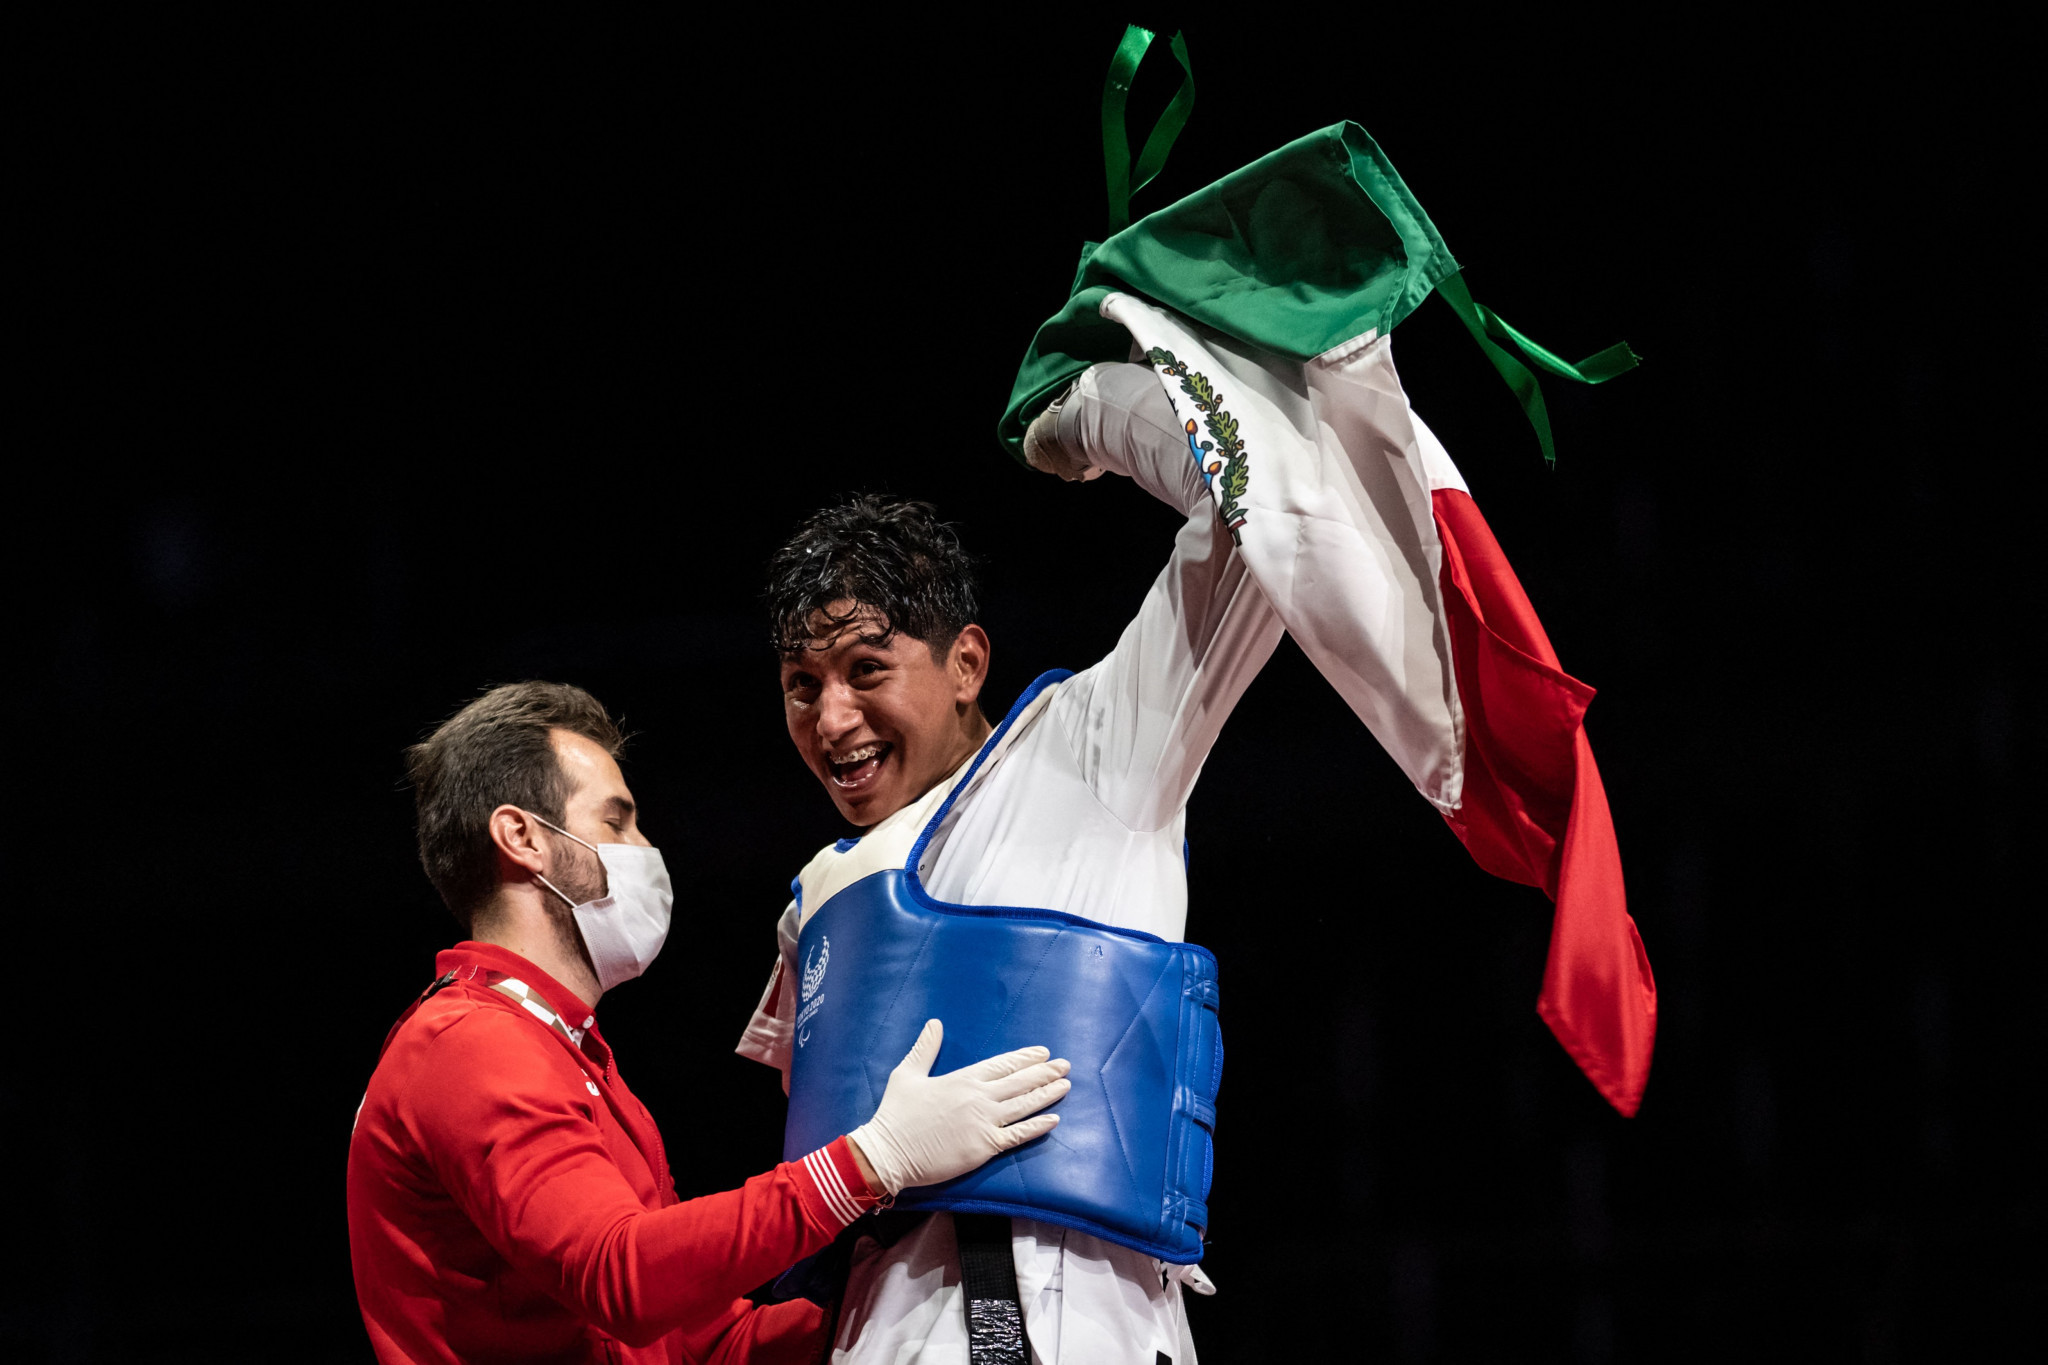 Tokyo 2020 gold medallist Juan Diego García López of Mexico, right, was among the winners at the World Taekwondo President's Cup Oceania ©Getty Images